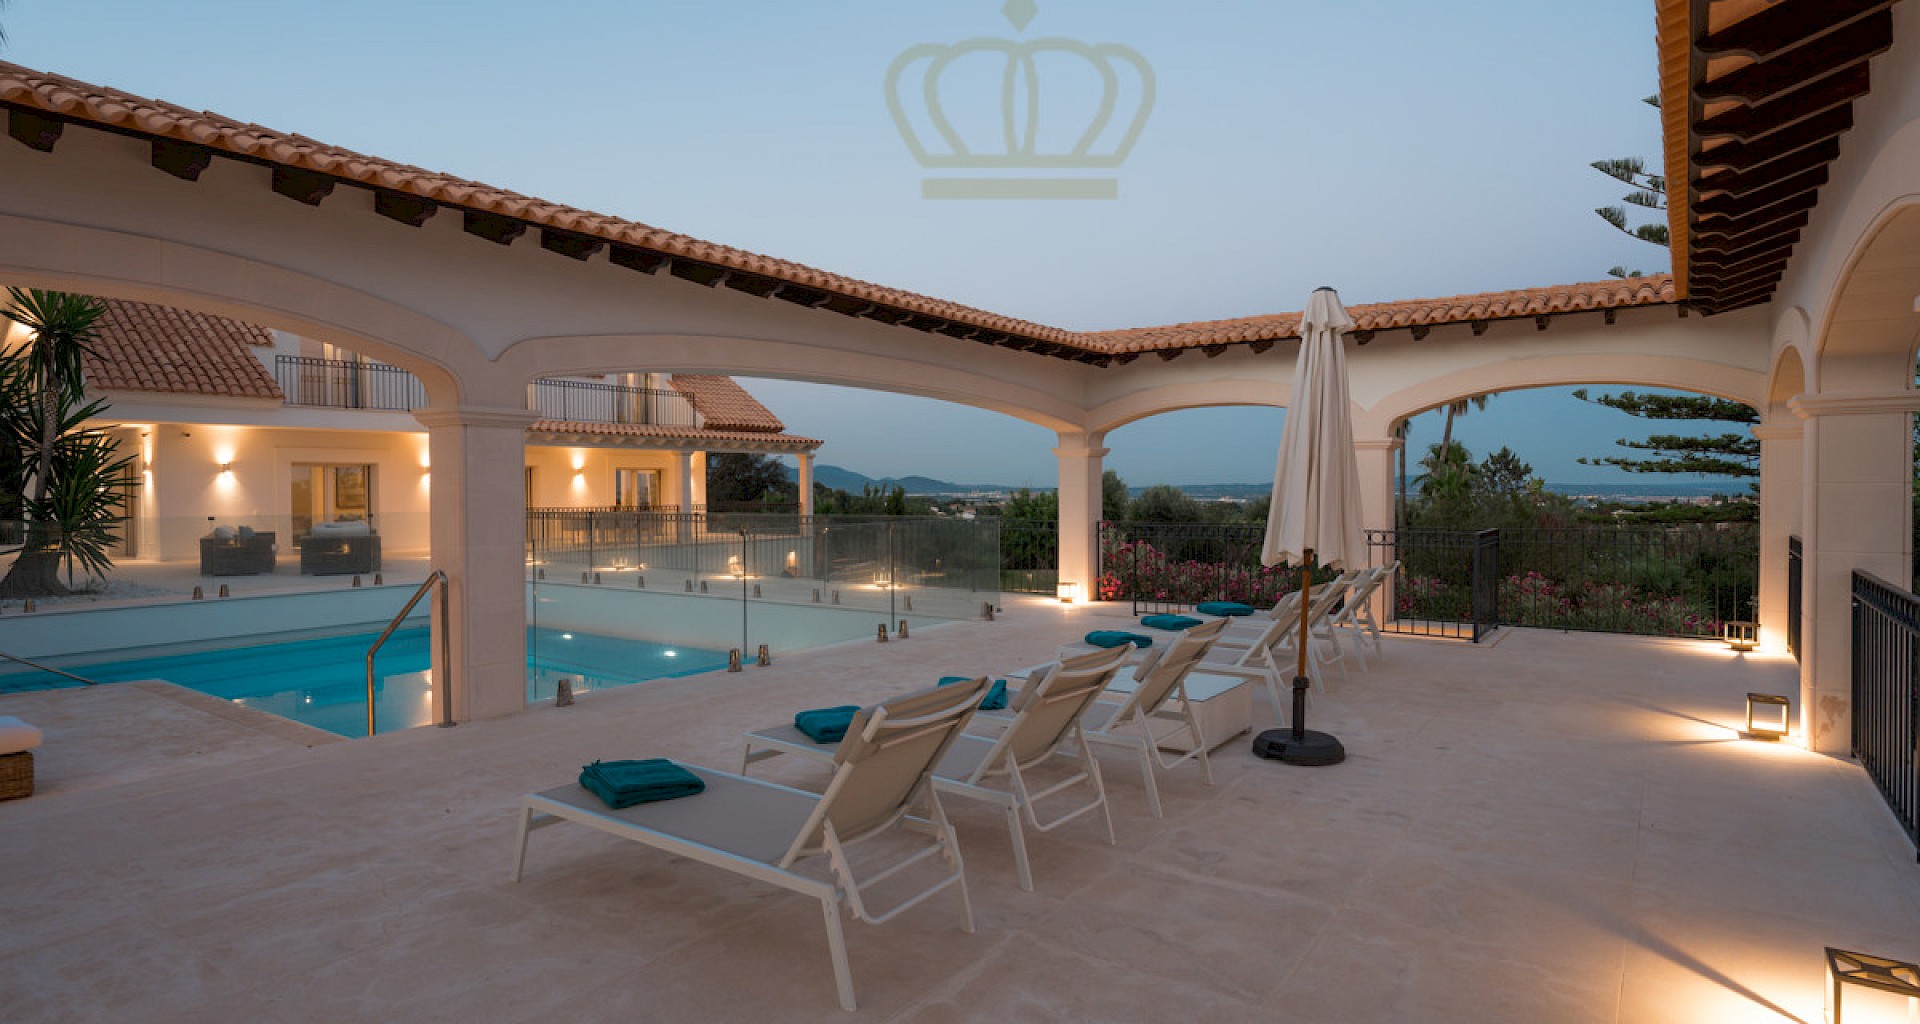 KROHN & LUEDEMANN Great villa property with views over Palma and large property 